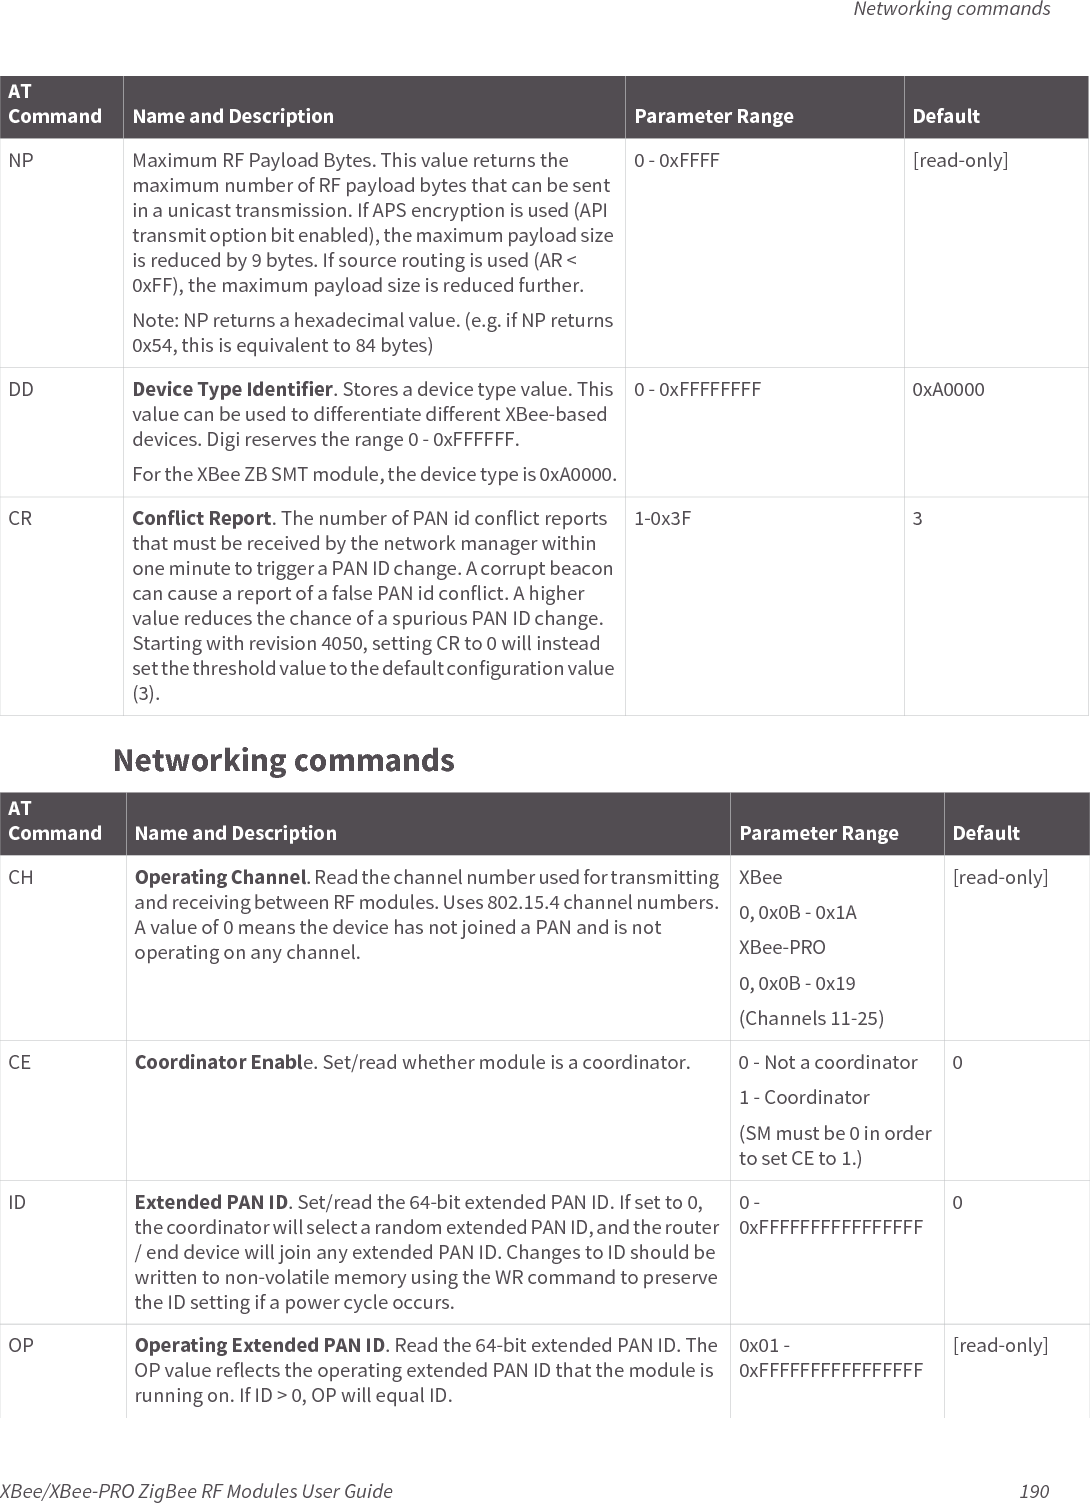 Networking commandsXBee/XBee-PRO ZigBee RF Modules User Guide 190Networking commandsNP Maximum RF Payload Bytes. This value returns the maximum number of RF payload bytes that can be sent in a unicast transmission. If APS encryption is used (API transmit option bit enabled), the maximum payload size is reduced by 9 bytes. If source routing is used (AR &lt; 0xFF), the maximum payload size is reduced further.Note: NP returns a hexadecimal value. (e.g. if NP returns 0x54, this is equivalent to 84 bytes)0 - 0xFFFF [read-only]DD Device Type Identifier. Stores a device type value. This value can be used to differentiate different XBee-based devices. Digi reserves the range 0 - 0xFFFFFF.For the XBee ZB SMT module, the device type is 0xA0000.0 - 0xFFFFFFFF 0xA0000CR Conflict Report. The number of PAN id conflict reports that must be received by the network manager within one minute to trigger a PAN ID change. A corrupt beacon can cause a report of a false PAN id conflict. A higher value reduces the chance of a spurious PAN ID change. Starting with revision 4050, setting CR to 0 will instead set the threshold value to the default configuration value (3).1-0x3F 3ATCommand Name and Description Parameter Range DefaultATCommand Name and Description Parameter Range DefaultCH Operating Channel. Read the channel number used for transmitting and receiving between RF modules. Uses 802.15.4 channel numbers. A value of 0 means the device has not joined a PAN and is not operating on any channel.XBee0, 0x0B - 0x1A XBee-PRO0, 0x0B - 0x19(Channels 11-25)[read-only]CE Coordinator Enable. Set/read whether module is a coordinator. 0 - Not a coordinator1 - Coordinator(SM must be 0 in order to set CE to 1.)0ID Extended PAN ID. Set/read the 64-bit extended PAN ID. If set to 0, the coordinator will select a random extended PAN ID, and the router / end device will join any extended PAN ID. Changes to ID should be written to non-volatile memory using the WR command to preserve the ID setting if a power cycle occurs.0 - 0xFFFFFFFFFFFFFFFF0OP Operating Extended PAN ID. Read the 64-bit extended PAN ID. The OP value reflects the operating extended PAN ID that the module is running on. If ID &gt; 0, OP will equal ID.0x01 - 0xFFFFFFFFFFFFFFFF[read-only]